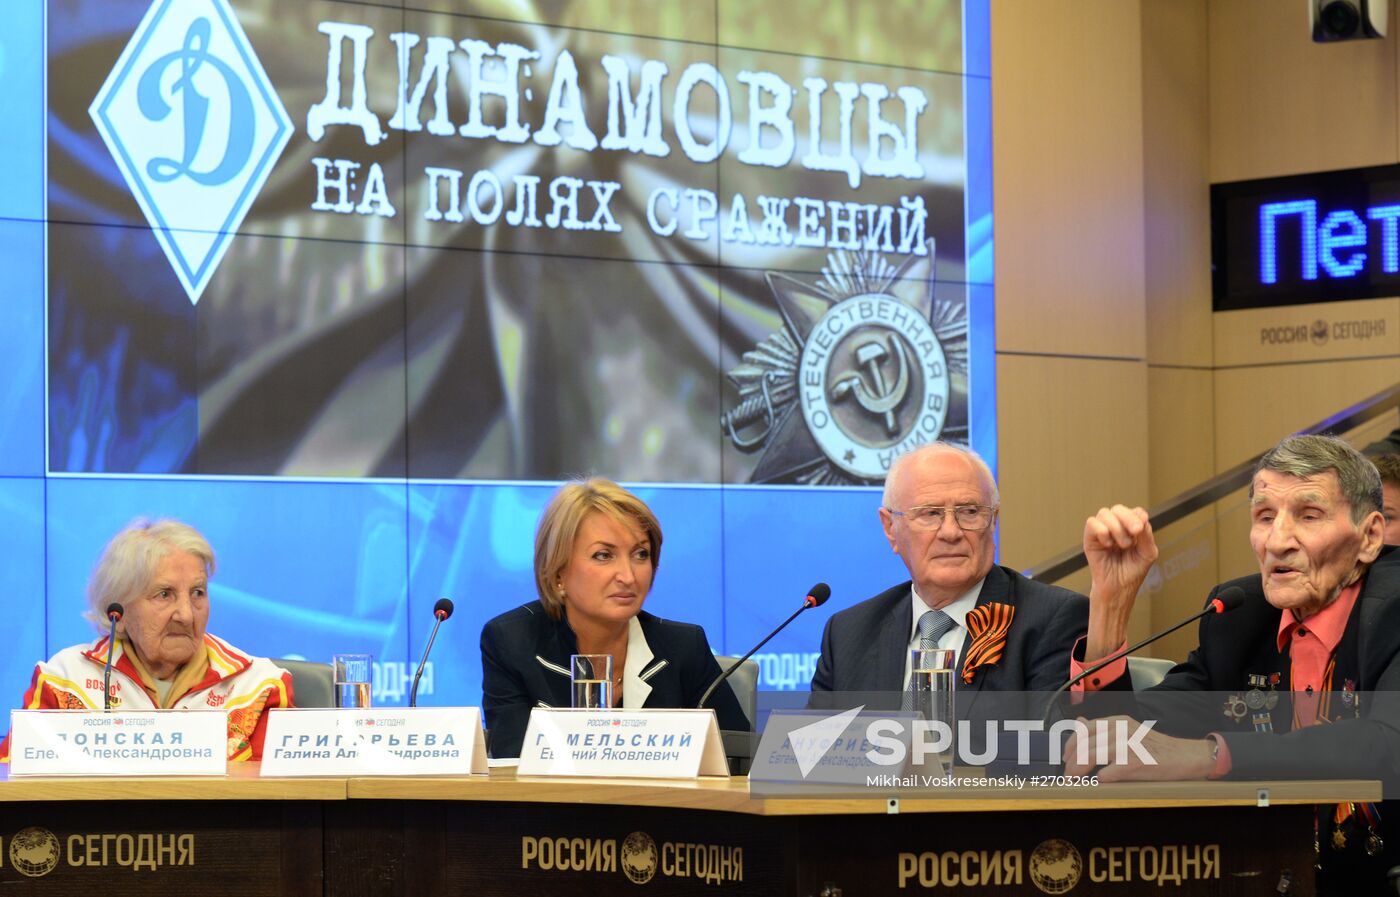 News conference on first run of film "Dynamo athletes on battlefields"